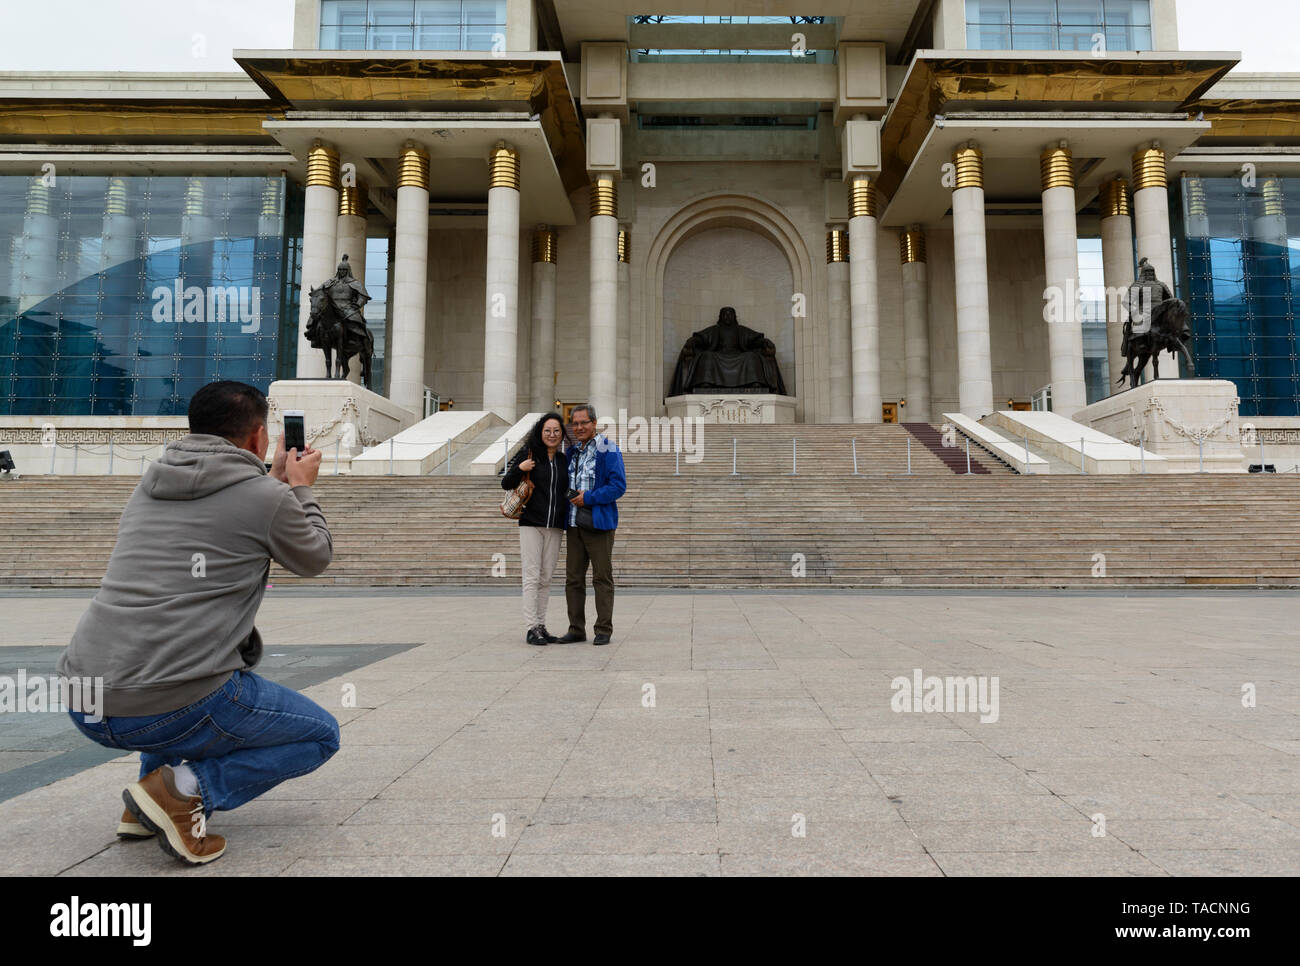 Government Palace on Sükhbaatar Square, Ulaanbaatar, Mongolia. Couple photographed by a friend. Stock Photo